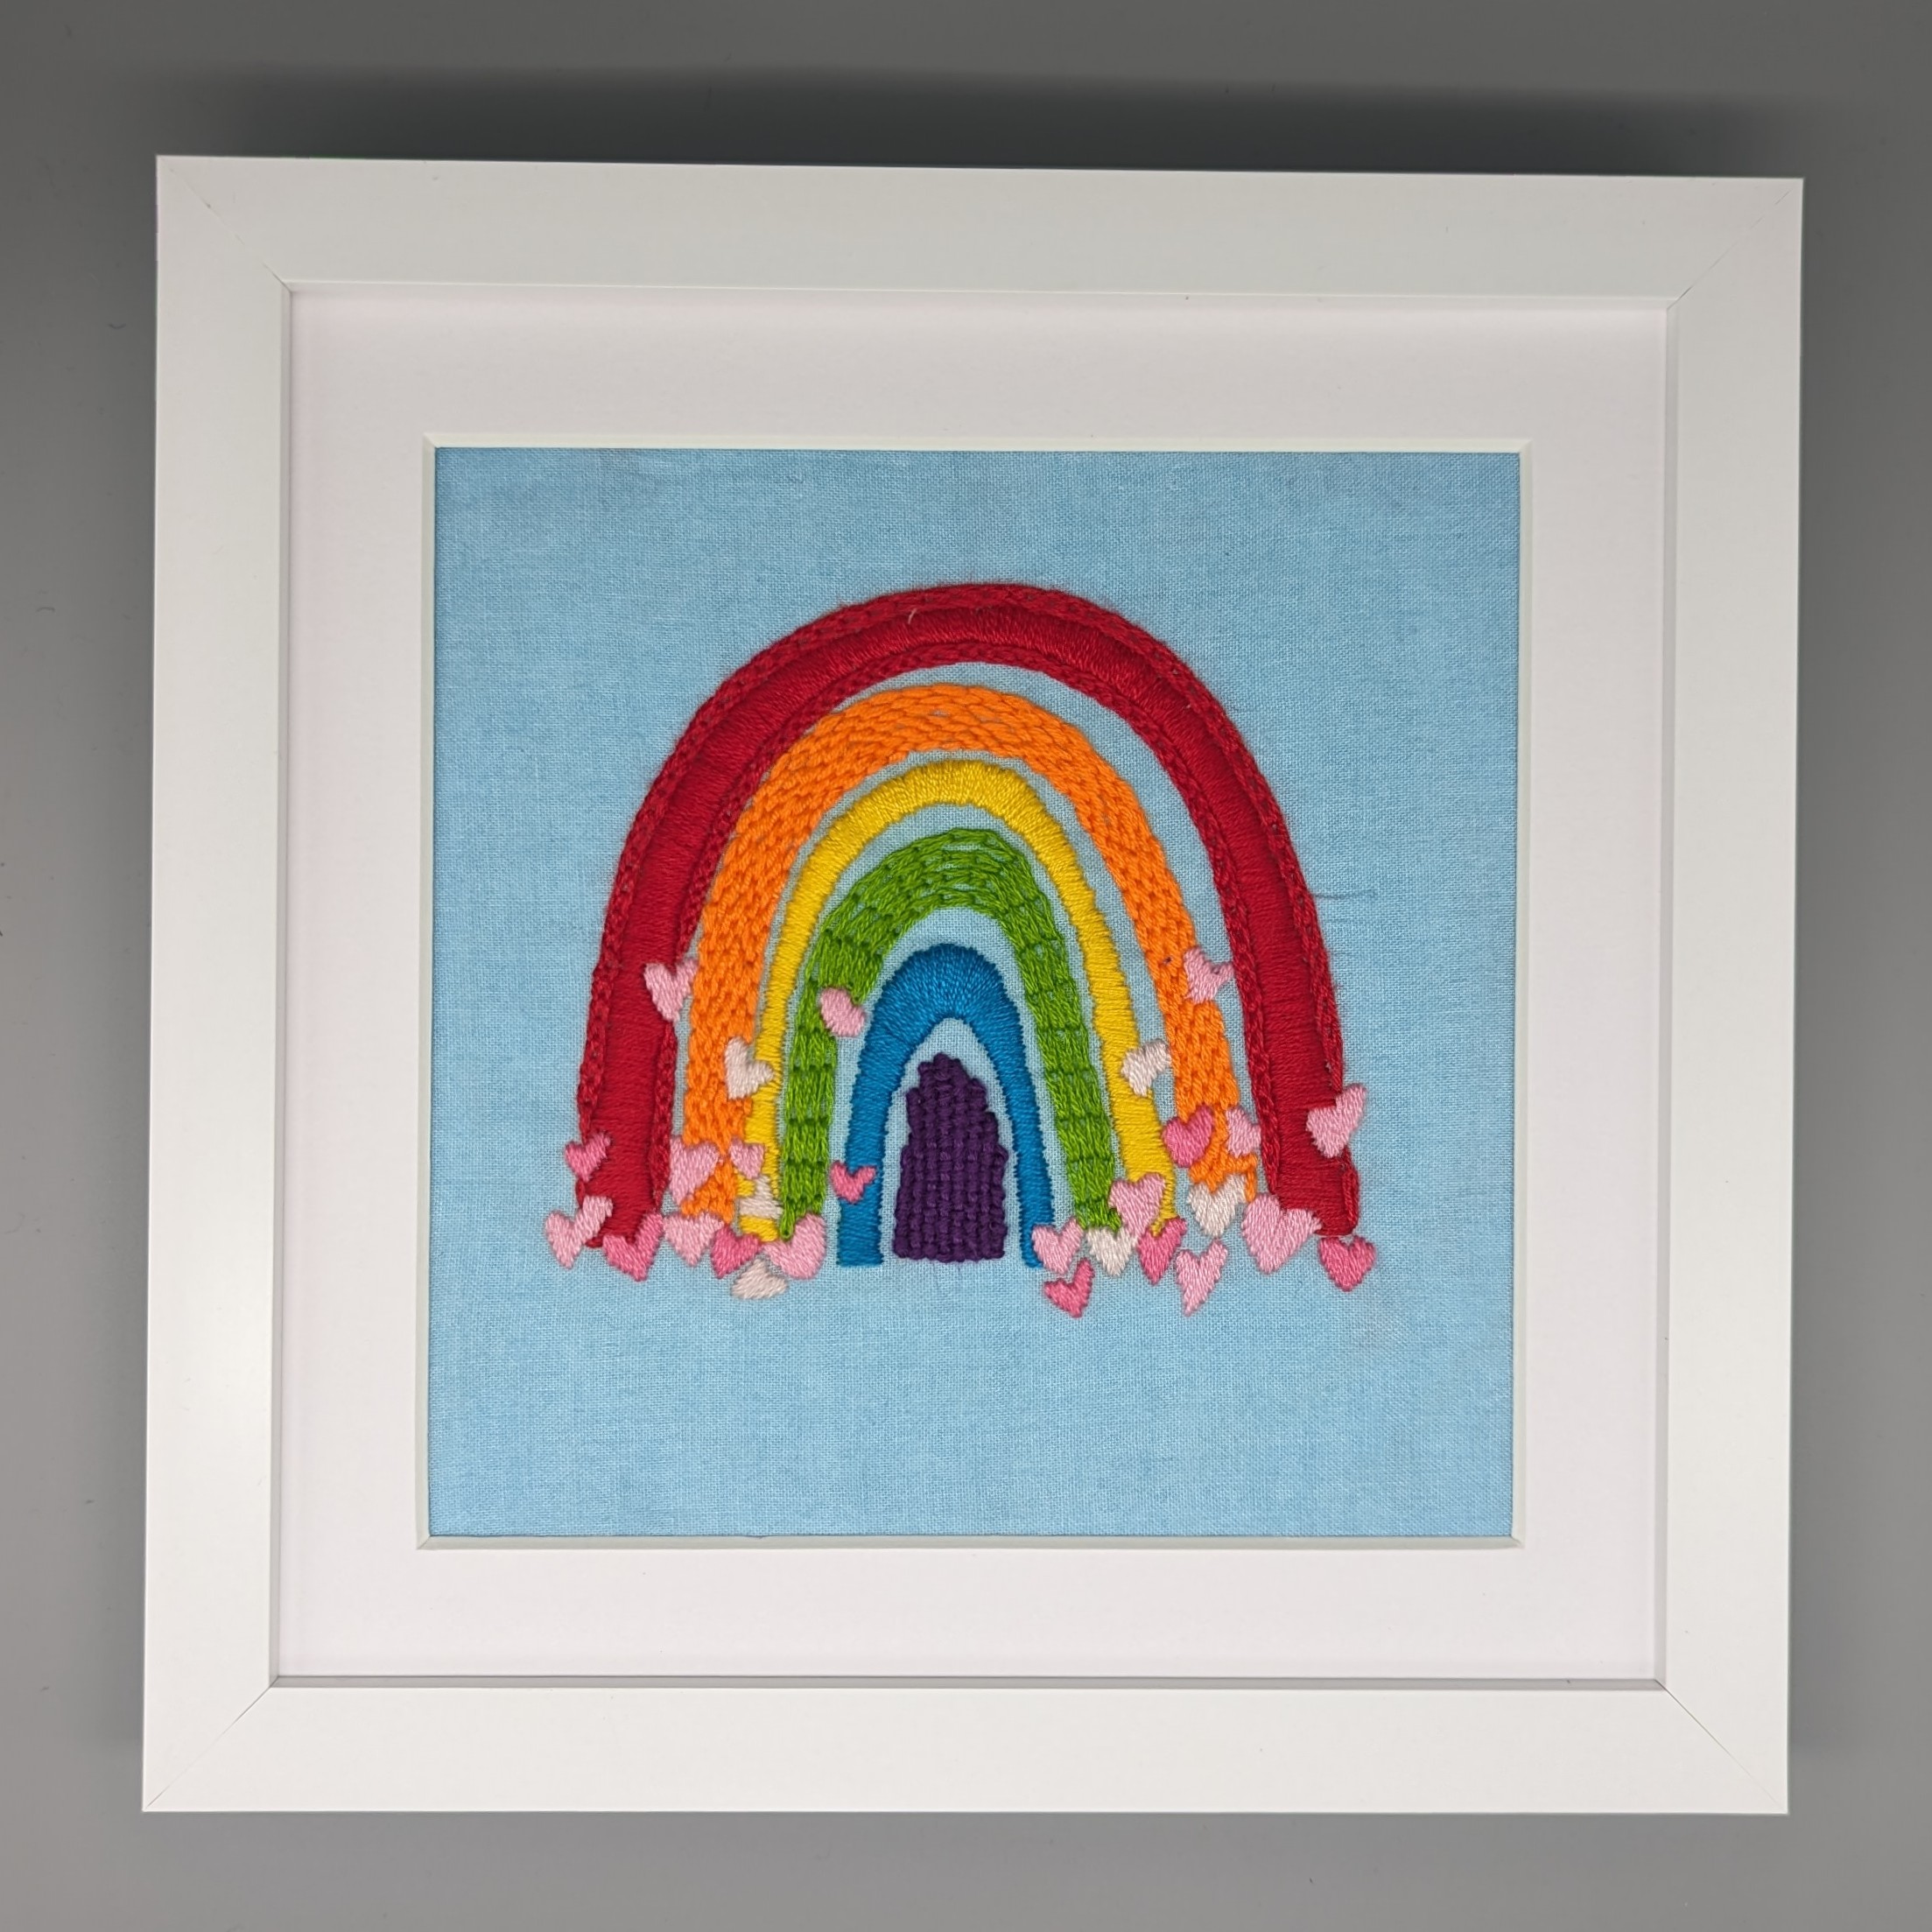 Featured image for “Hand Embroidered Rainbow and Hearts”